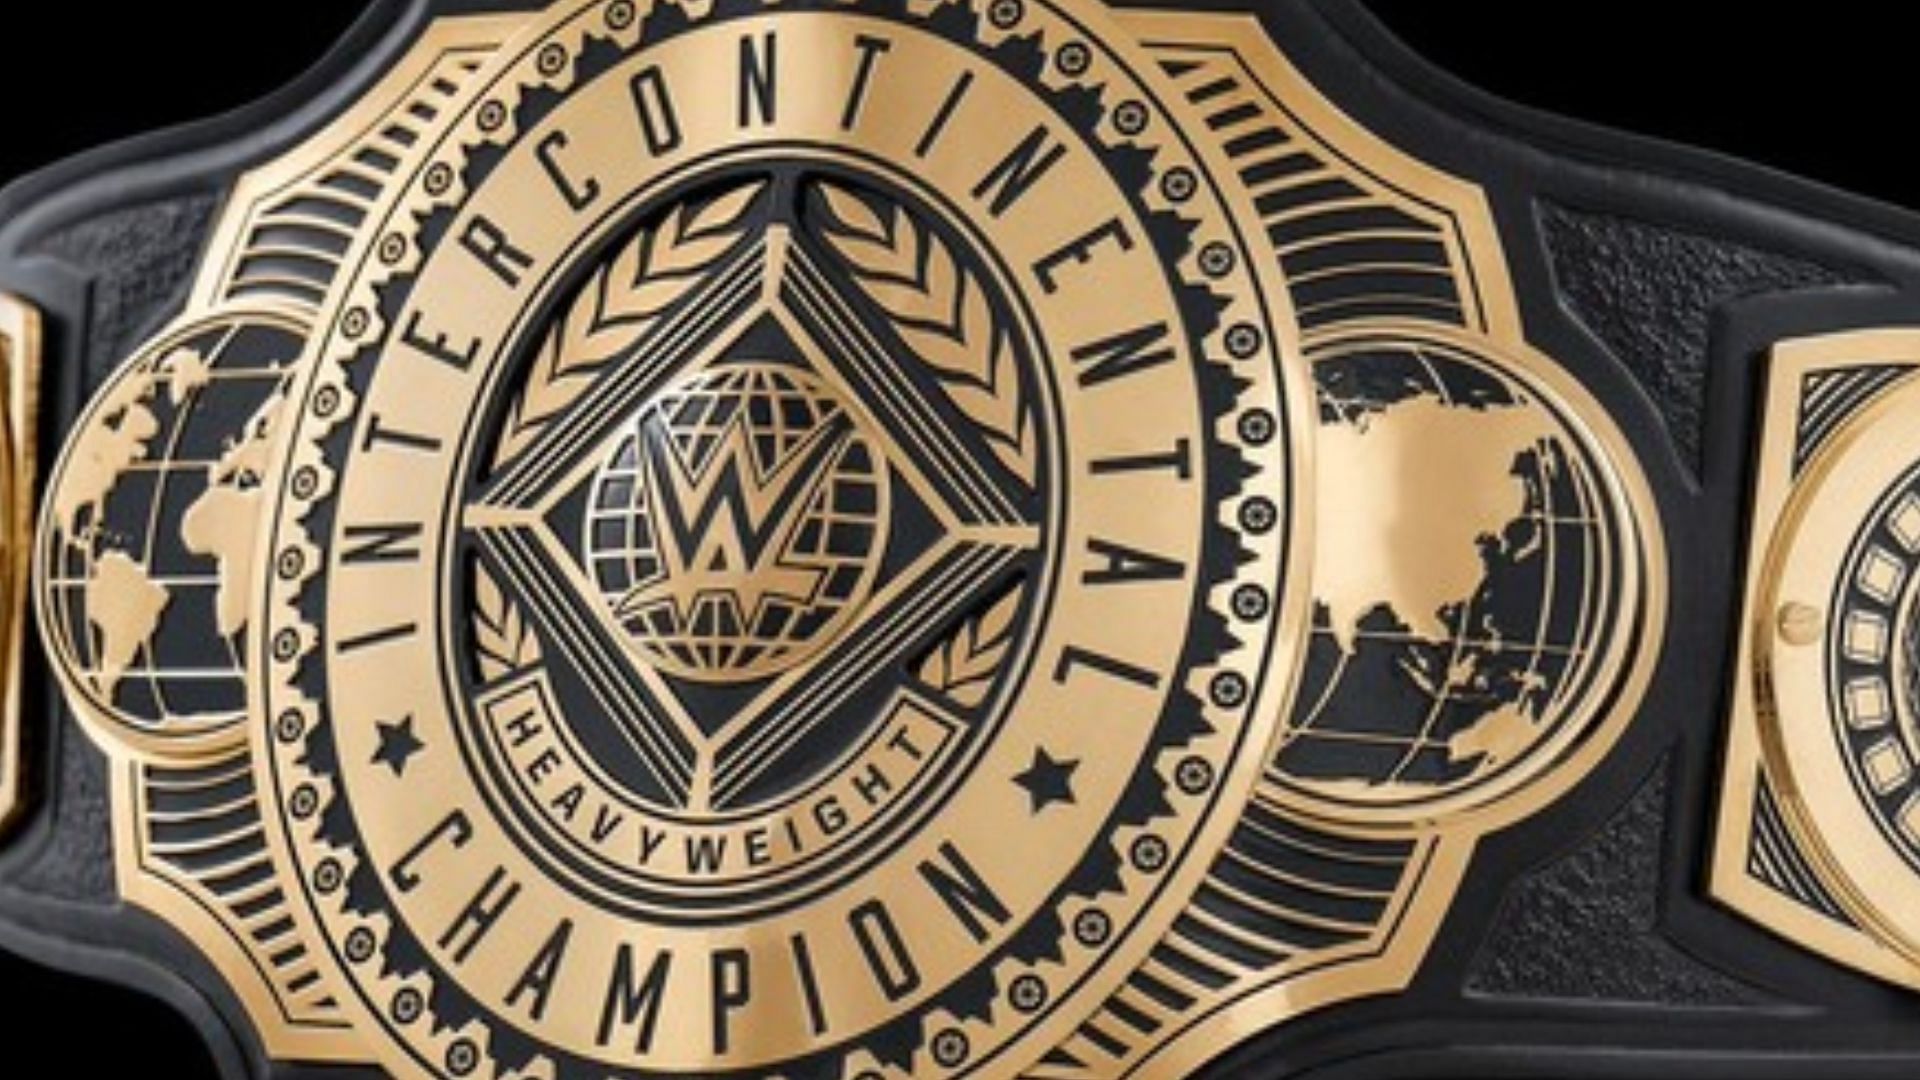 A former WWE Intercontinental Champion has teased a return to AEW